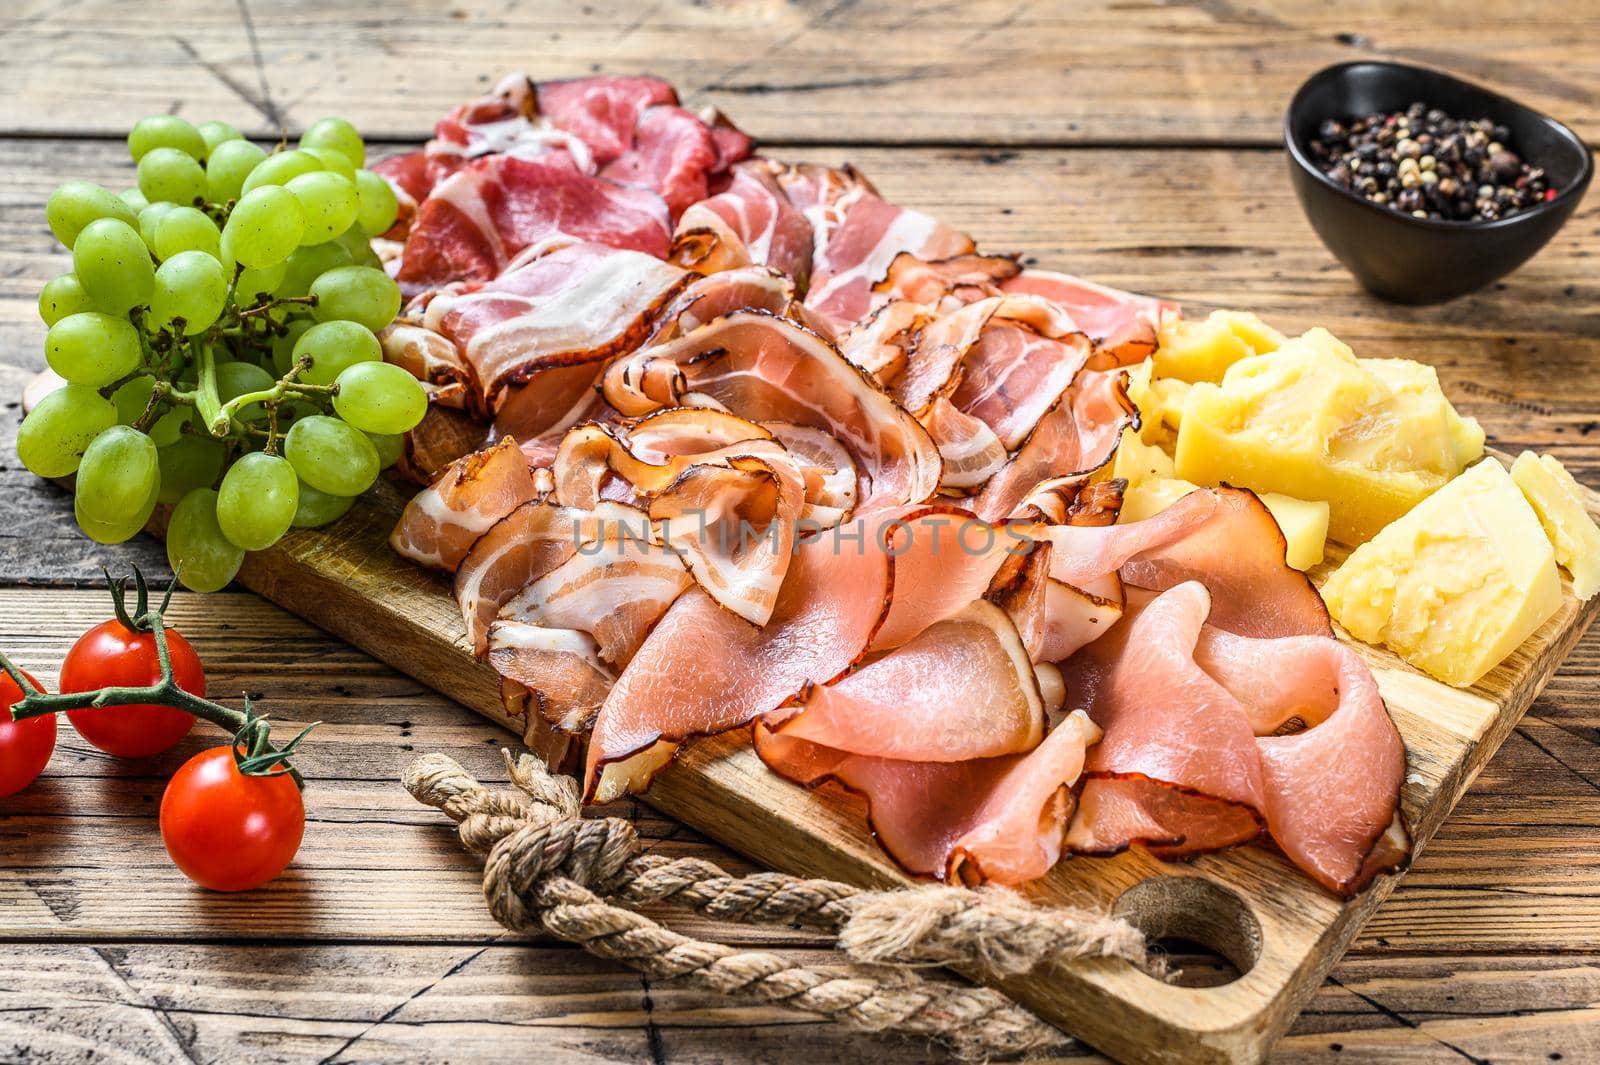 Meat antipasto board, pancetta, salami, sliced ham, sausage, prosciutto, bacon with grape and parmesan cheese. Wooden background. Top view by Composter